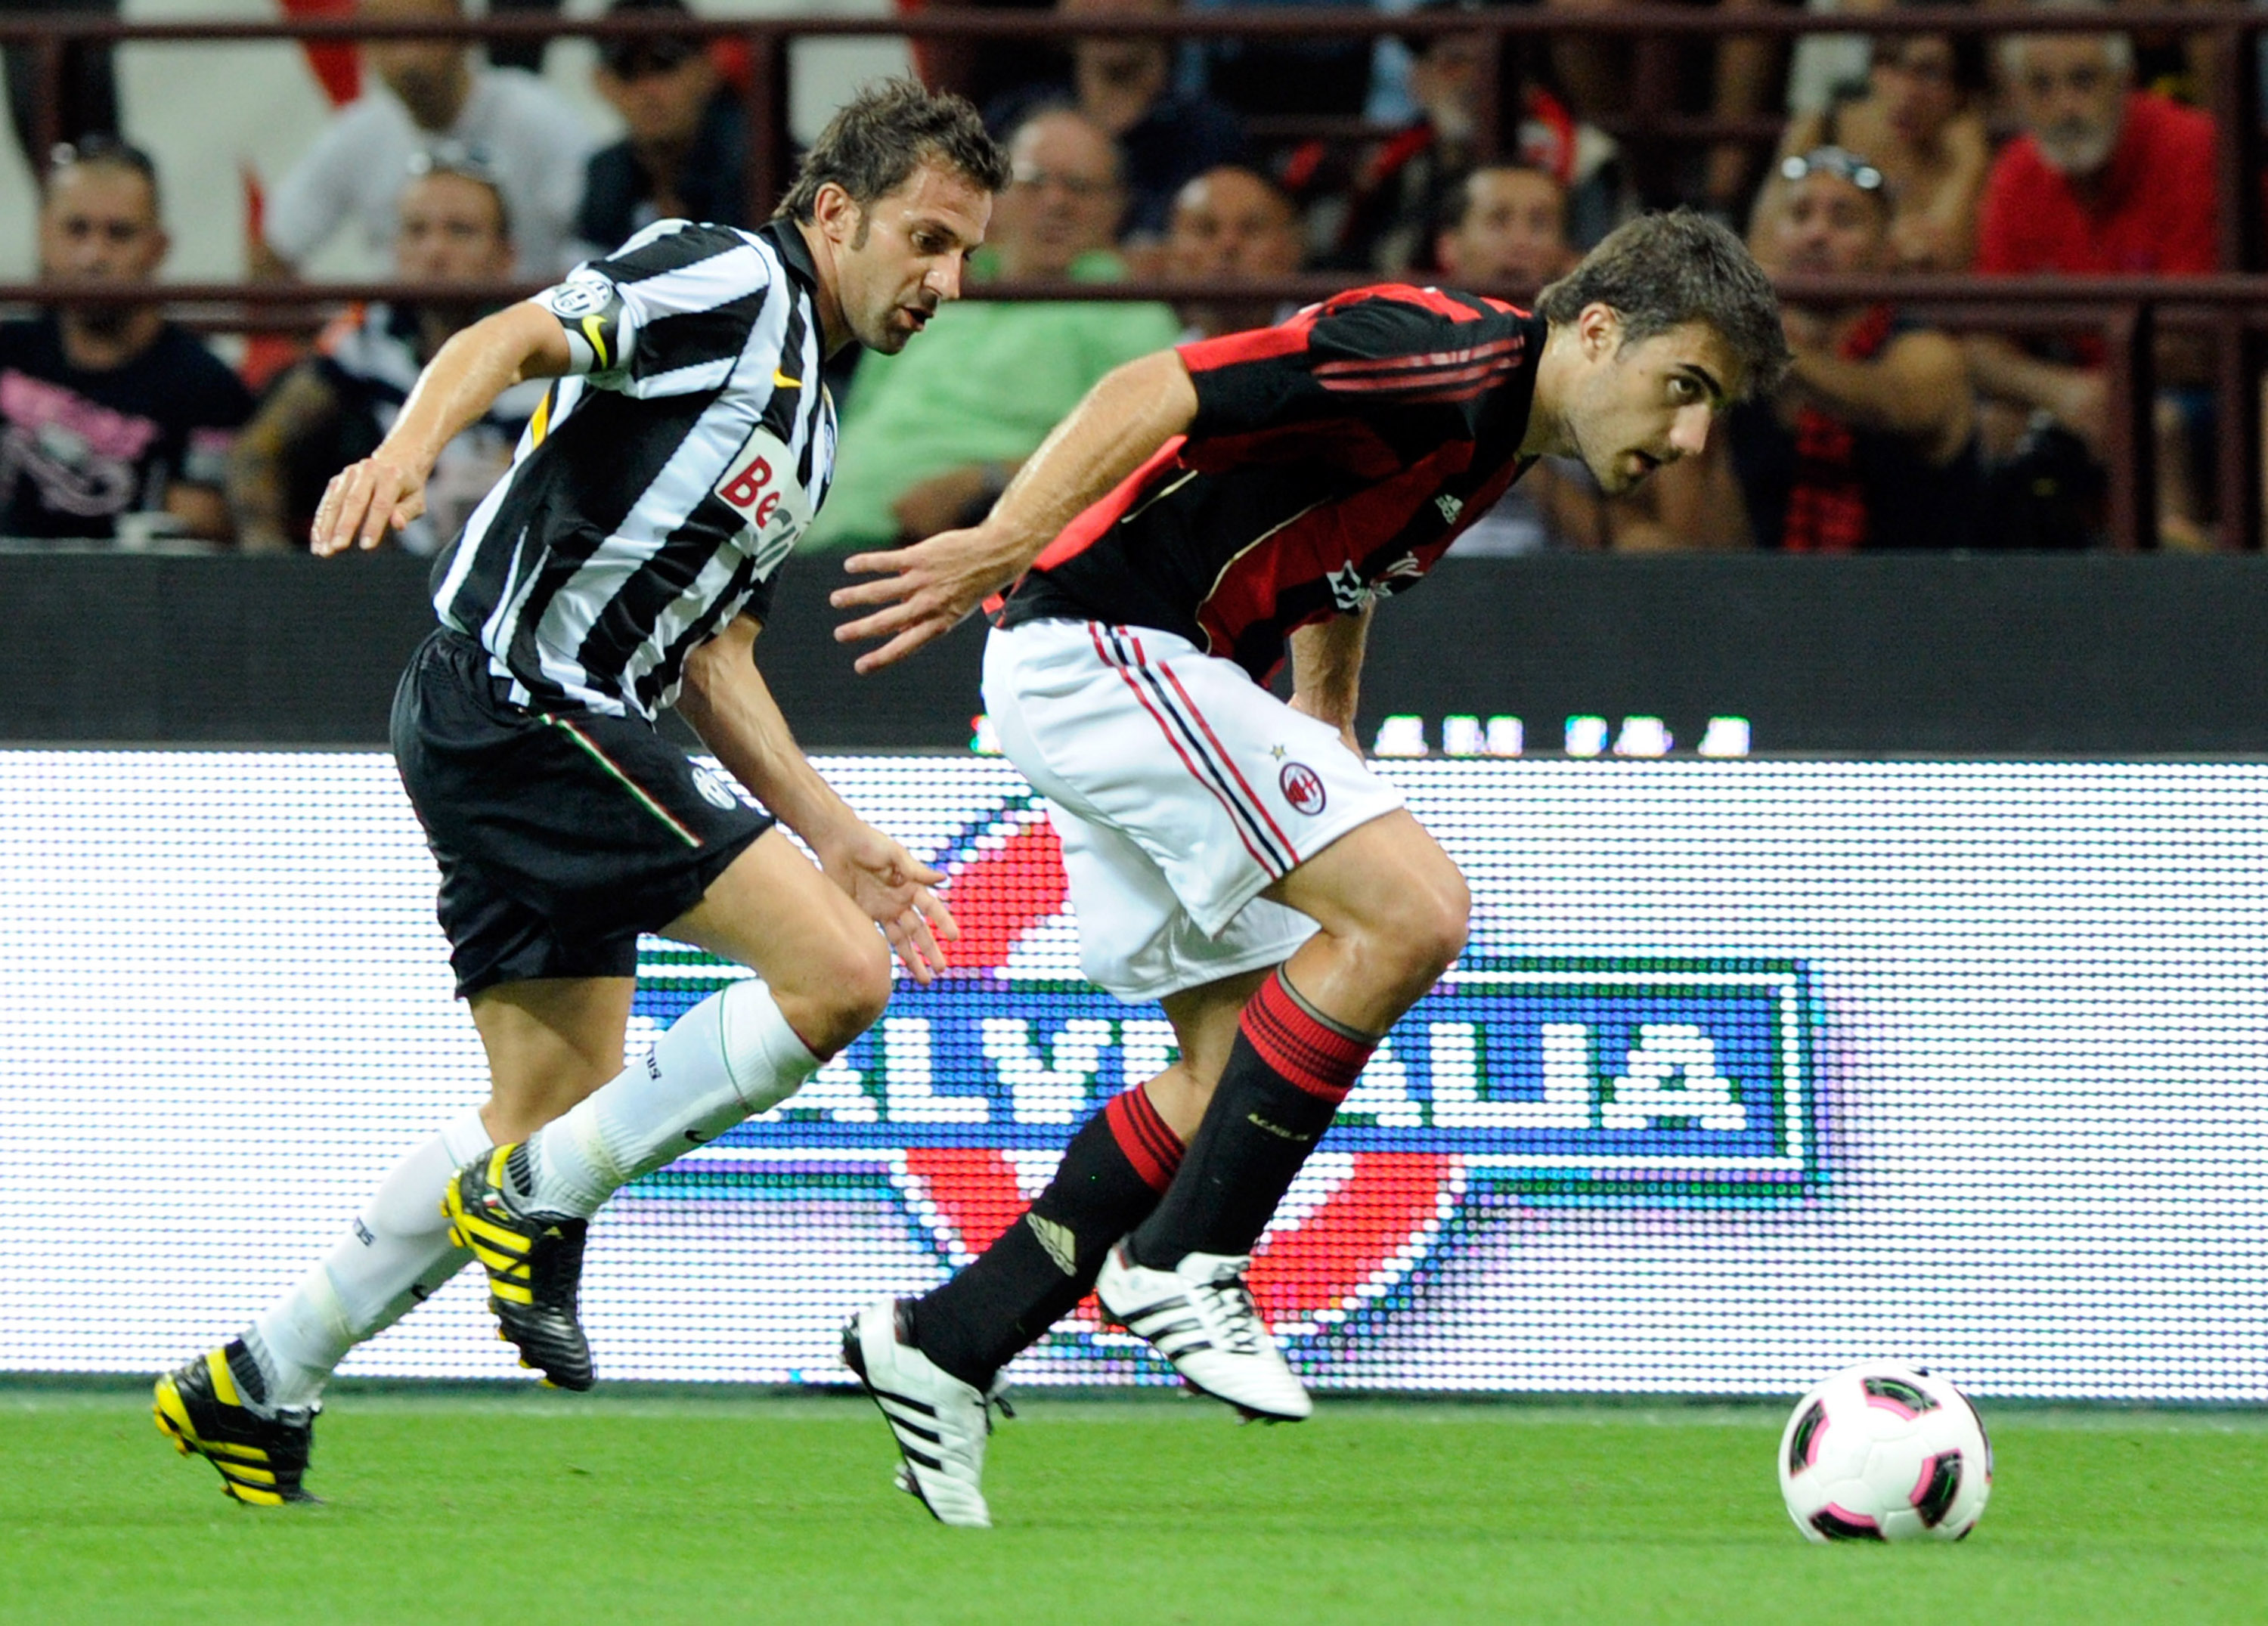 MILAN, ITALY - AUGUST 22:  Sokratis Papasthatopoulos of AC Milan and Alessandro Del Piero of Juventus FC in action during the Berlusconi Trophy match between Milan and Juventus at Giuseppe Meazza Stadium on August 22, 2010 in Milan, Italy.  (Photo by Clau